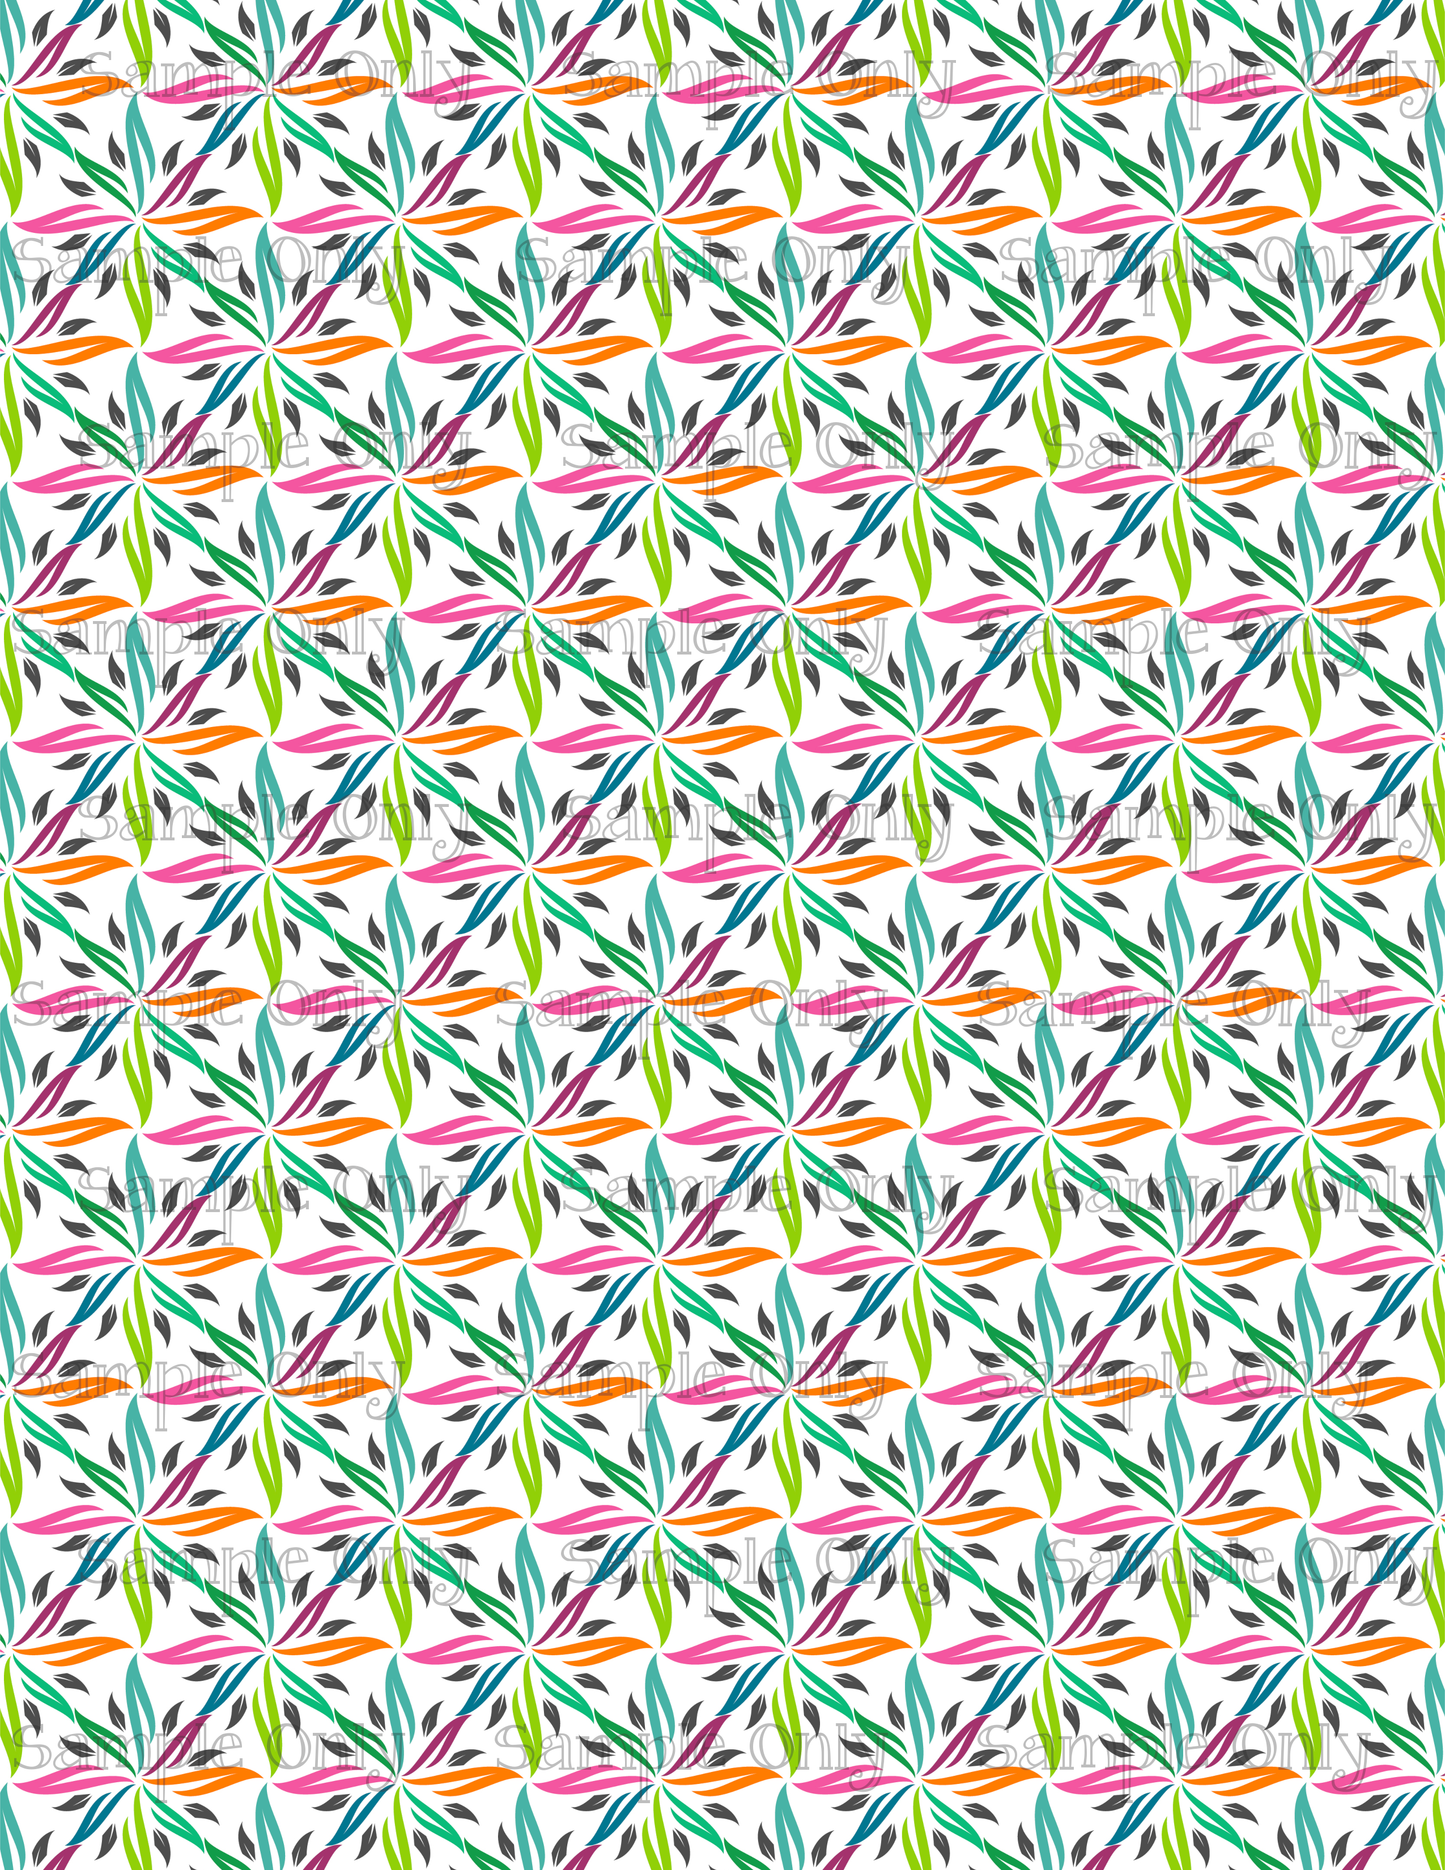 Colorful Abstract Leaves Pattern Image Sheet For Polymer Clay Transfer Decal DIGITAL FILE OR PRINTED